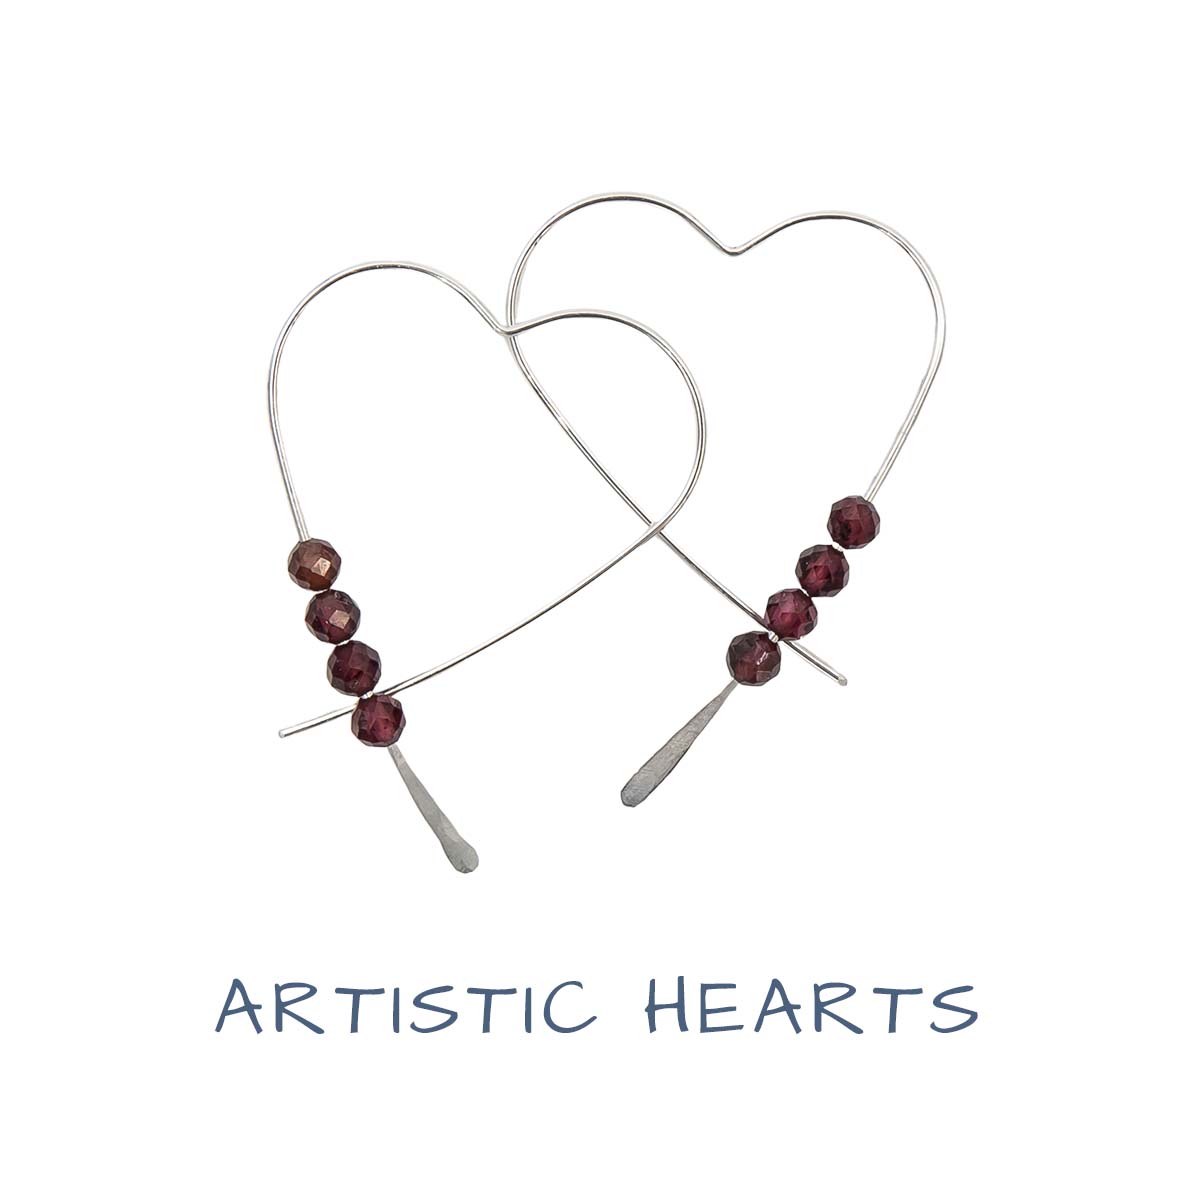 Earth Song Jewelry Artistic Hearts Collection 1200p.jpg